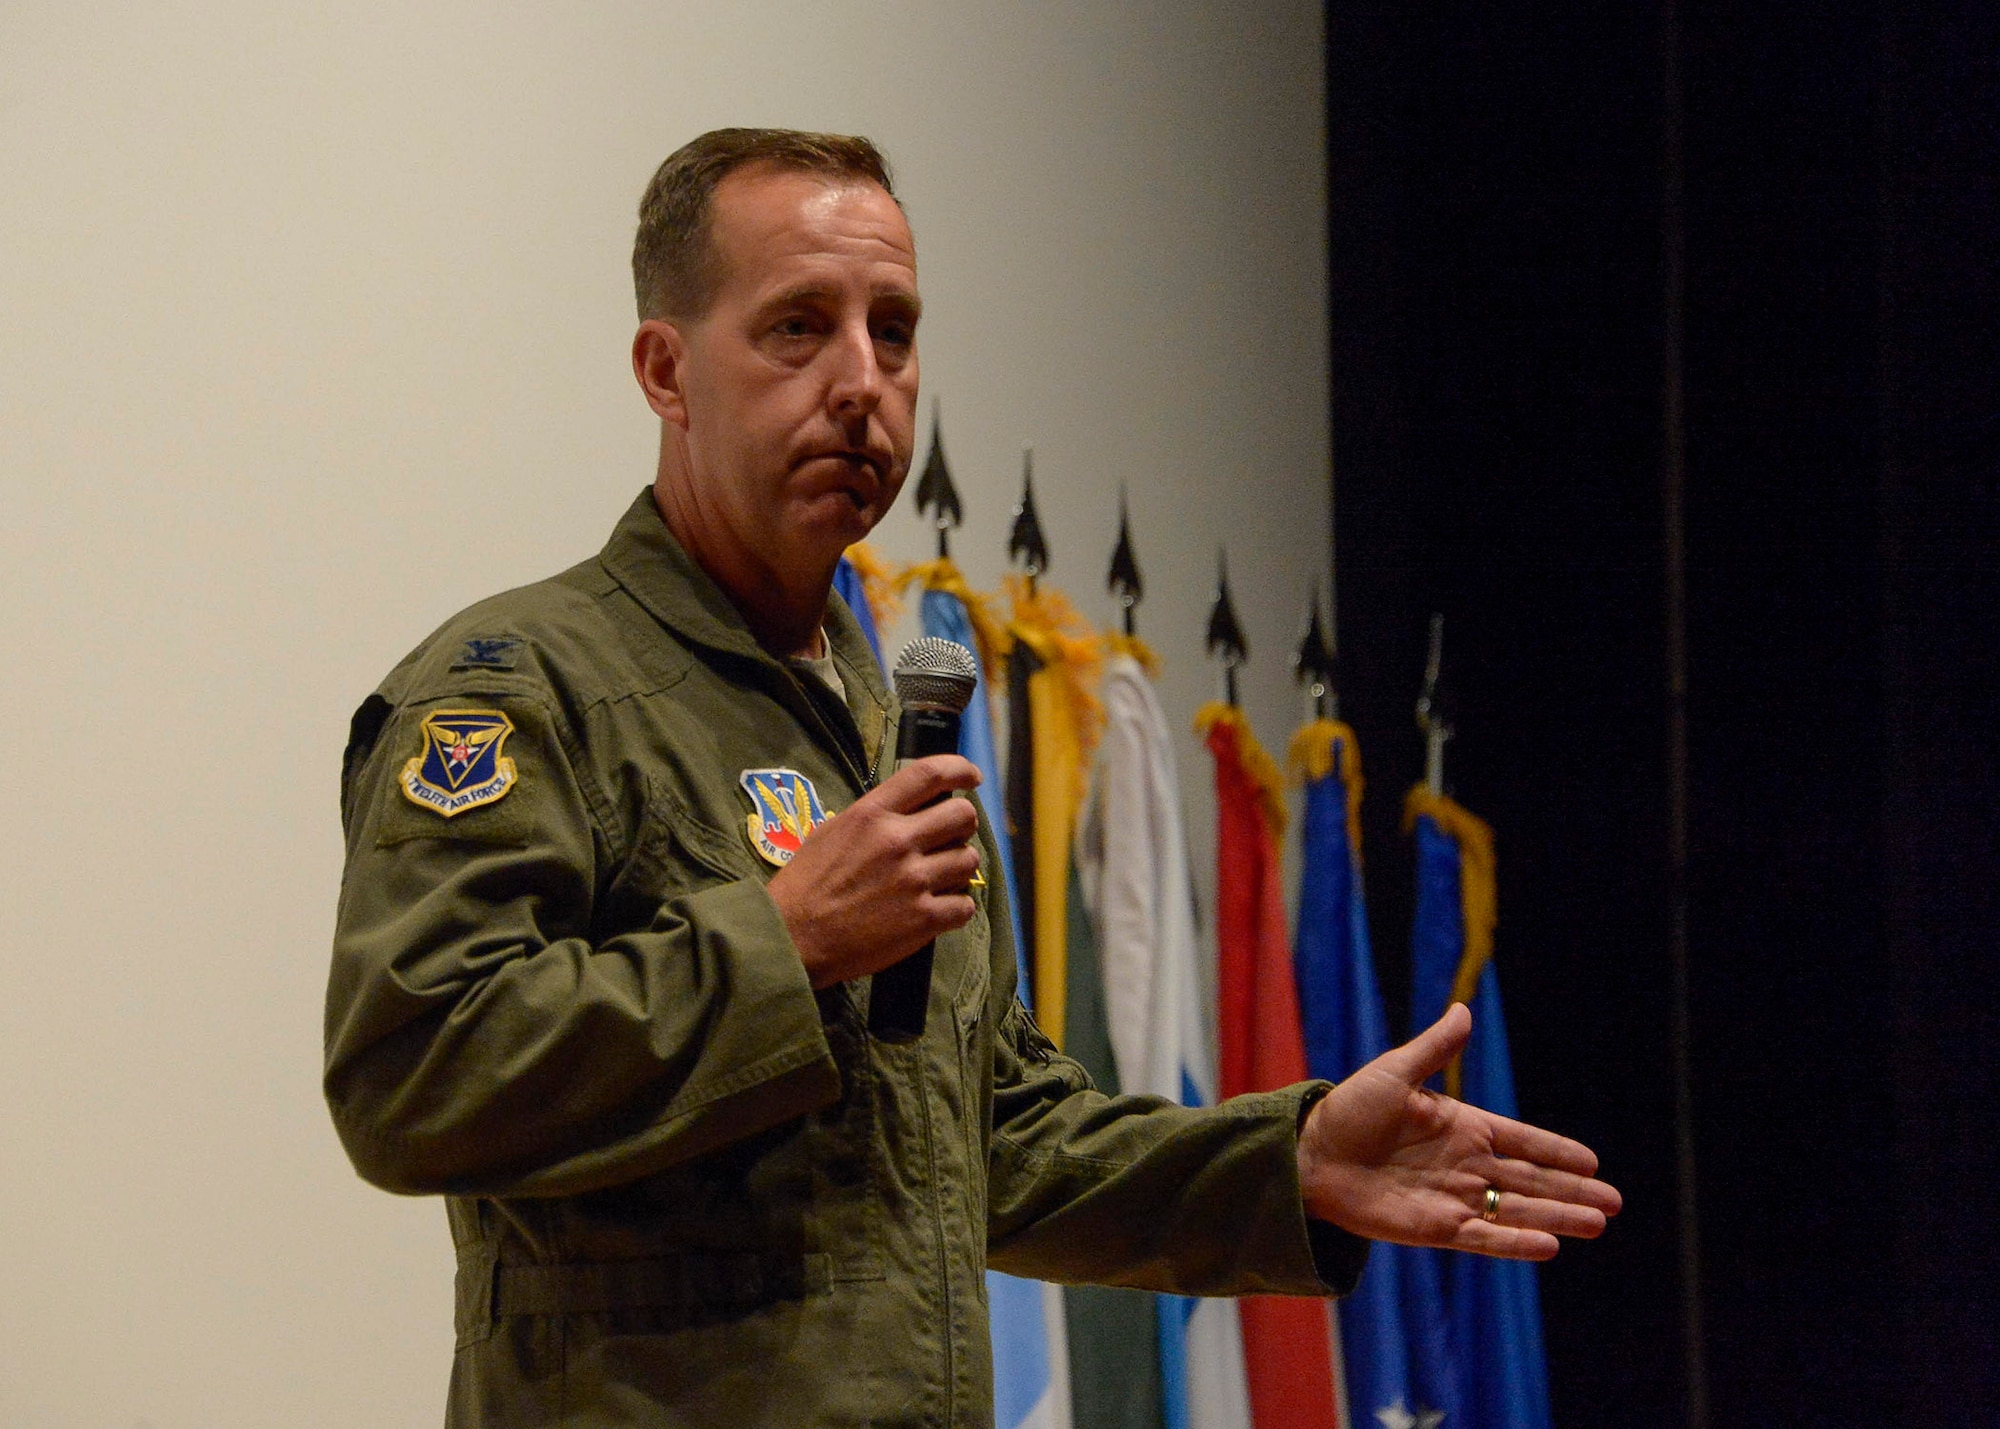 U.S. Air Force Col. Jay Bickley, 12th Air Force (Air Forces Southern) vice commander, welcomes service members from twelve different nations to Davis-Monthan AFB during a briefing on the upcoming PANAMAX exercise at the base theater on Davis-Monthan AFB, Ariz., July 26, 2016. Nineteen total nations are joining the United States for a seven-day exercise that will use simulations to command and control multinational notional sea, air, cyber and land forces defending the vital waterway and surrounding areas against threats from violent extremism and to provide for humanitarian relief, as necessary. The PANAMAX exercise goal is to increase the ability of nations to work together, enable assembled forces to organize as a multination task force and test their responsiveness in combined operations. (U.S. Air Force photo by Tech. Sgt. Heather R. Redman)